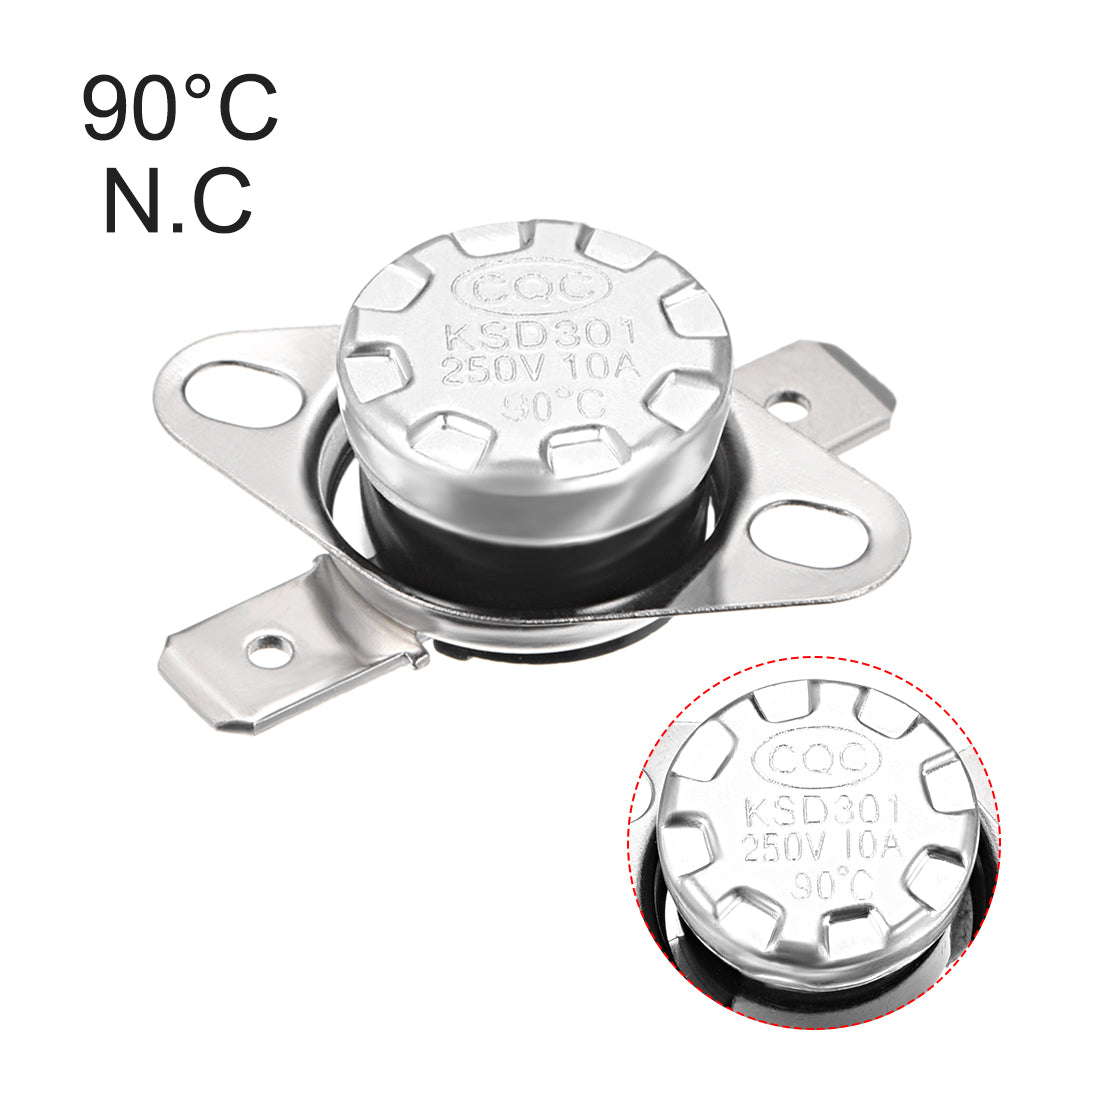 uxcell Uxcell Temperature Control Switch , Thermostat , KSD301 90°C , 10A , Normally Closed N.C 6.3mm Pin 2pcs